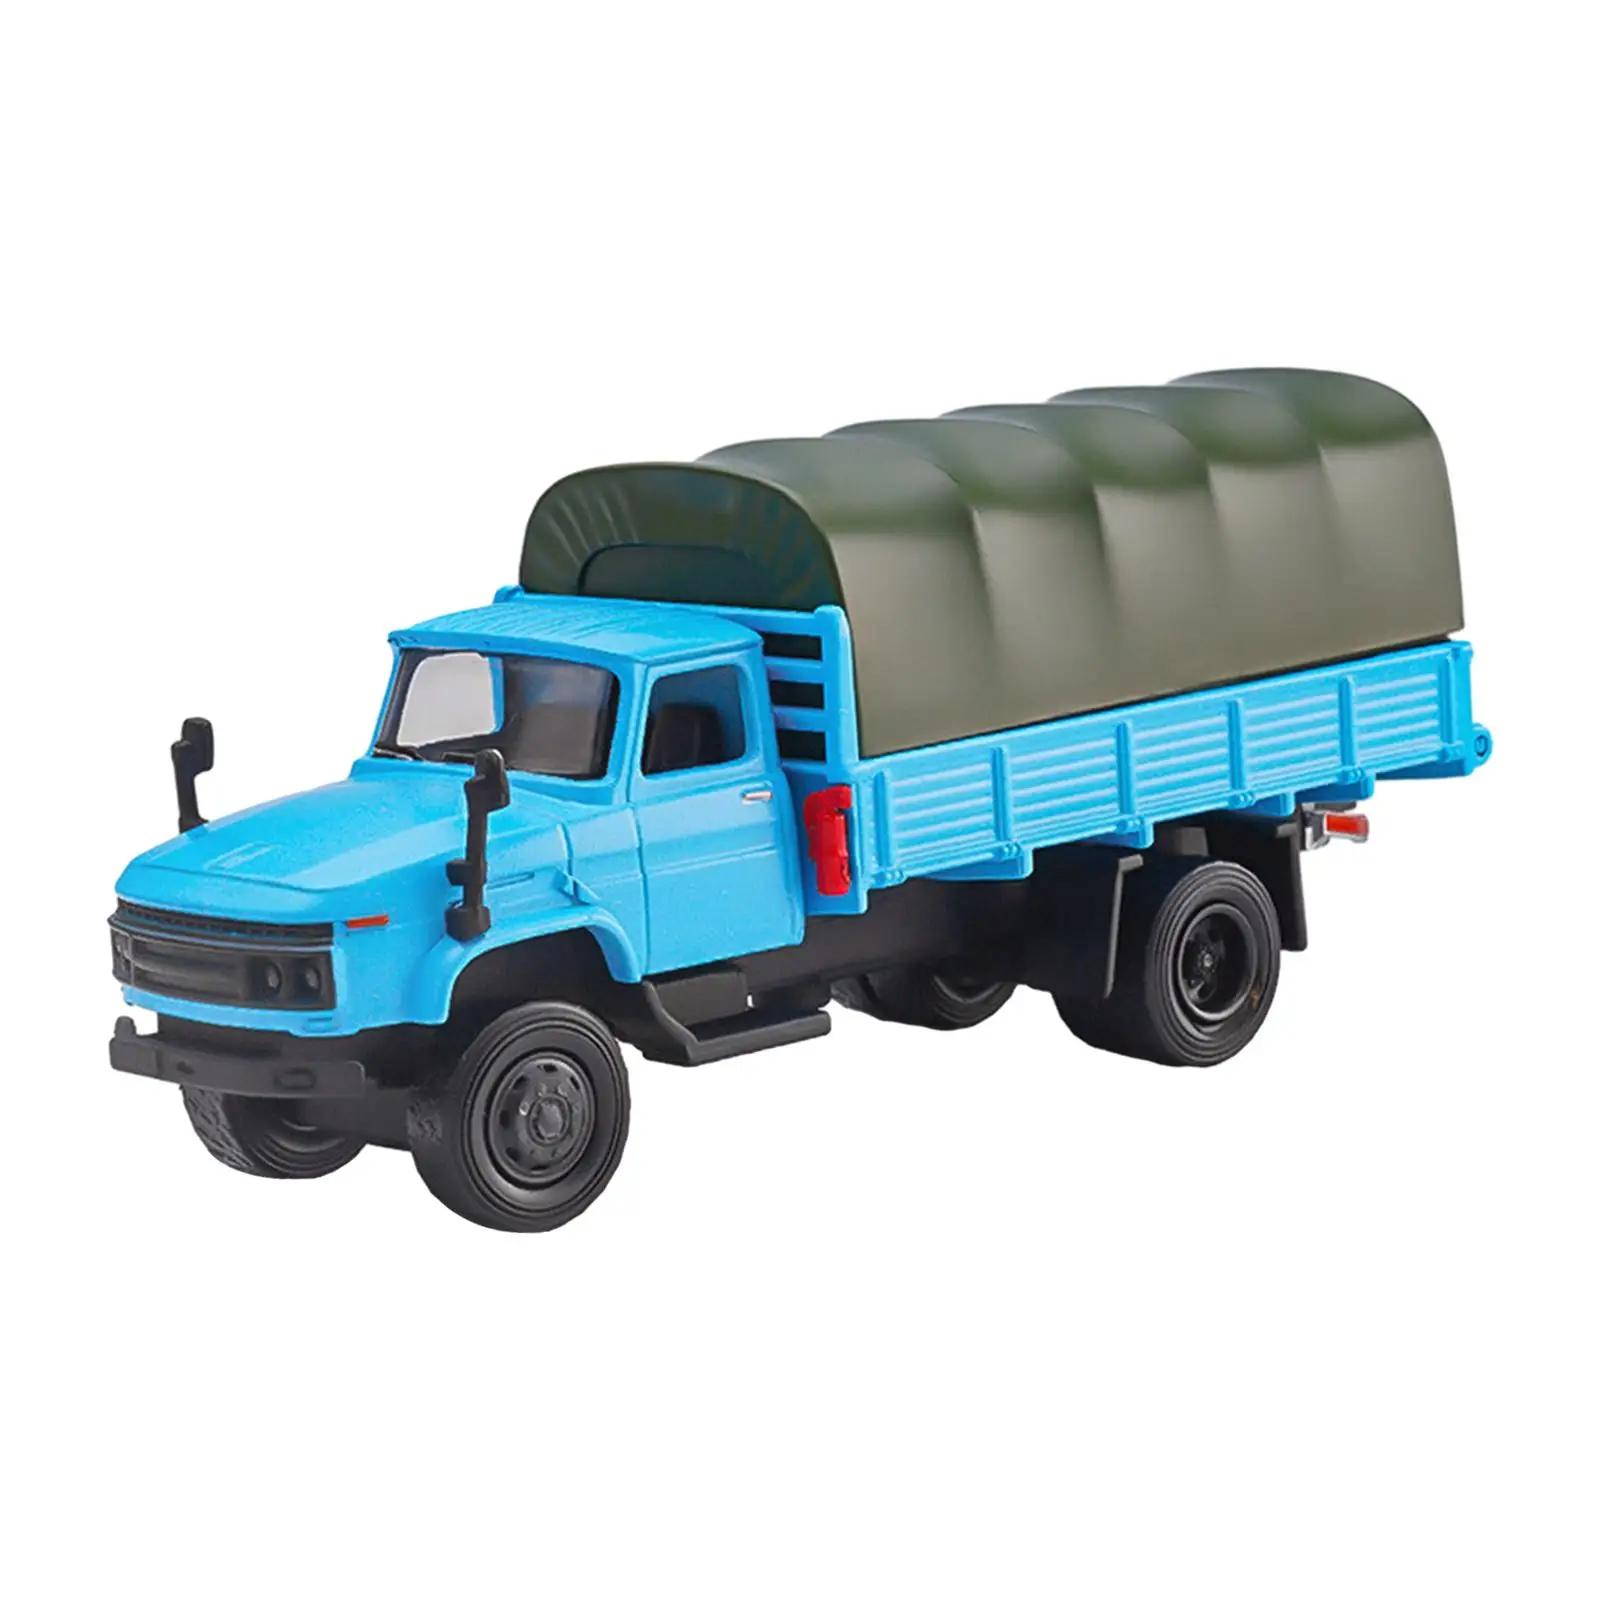 1/64 Transport Vehicle Desktop Ornament Train Railway Hand Painted Alloy Truck Mini Carrier Vehicle for Kids Adults Ornaments